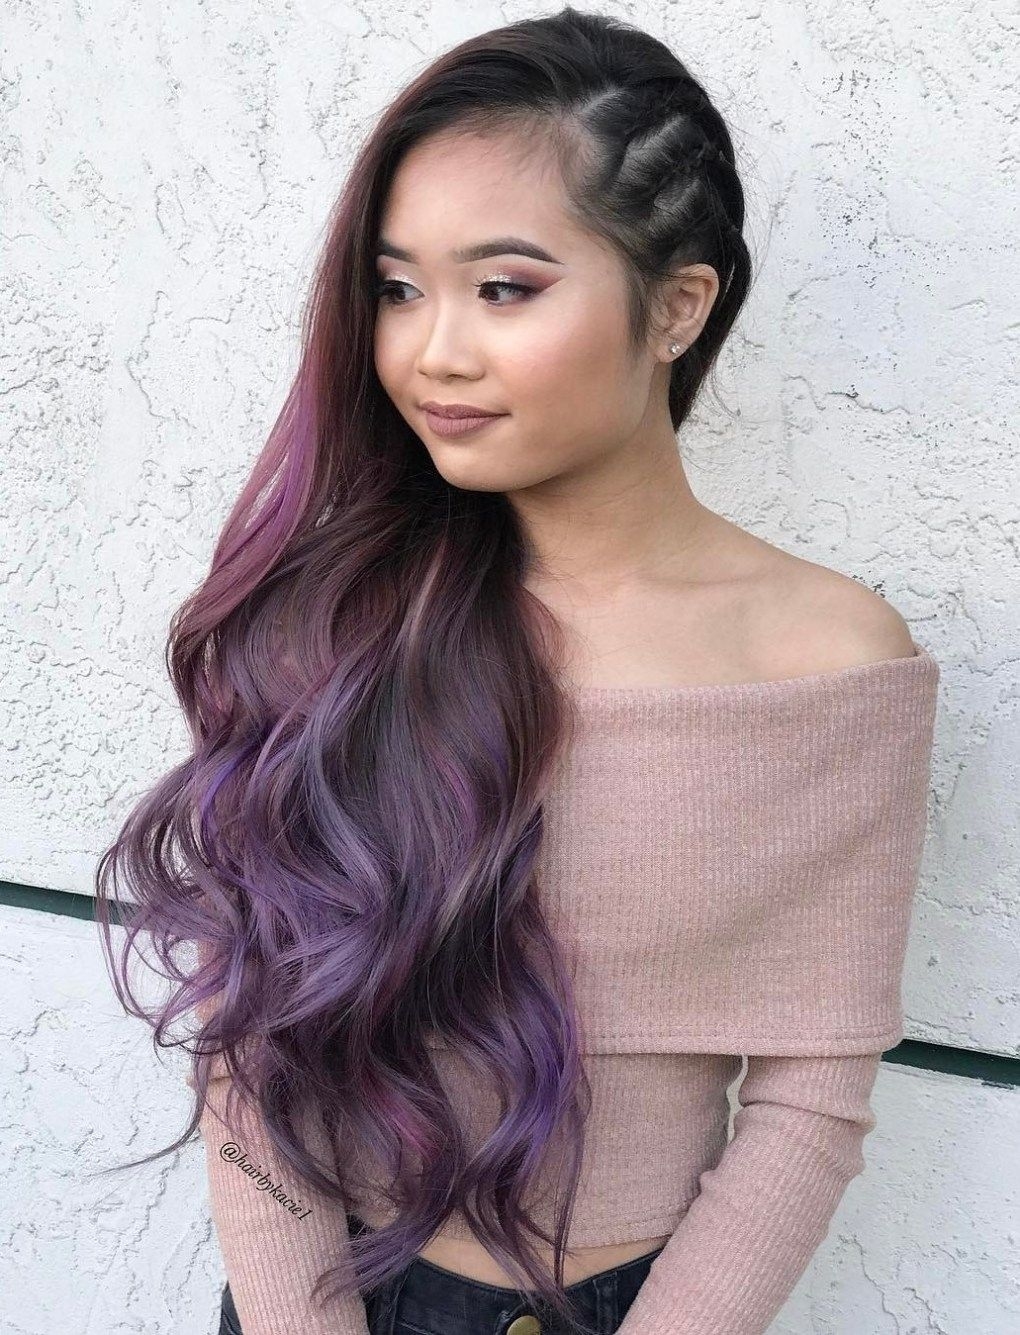 30 Modern Asian Hairstyles For Women And Girls In 2019 | Girls in Asian Hairstyles And Colors